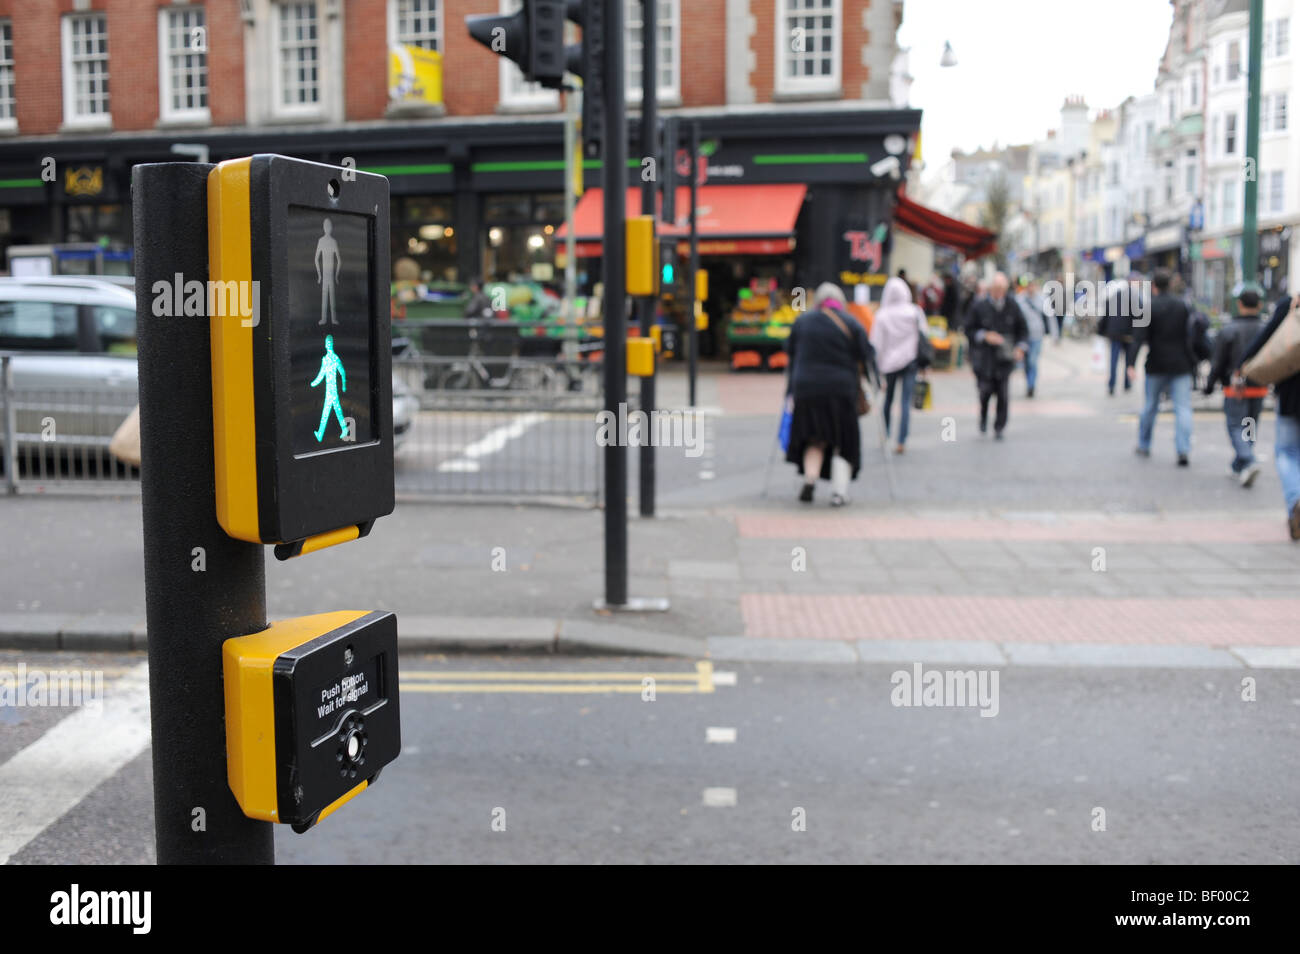 New puffin pedestrian crossings in Brighton city centre The flashing green man gives the all clear to cross Stock Photo